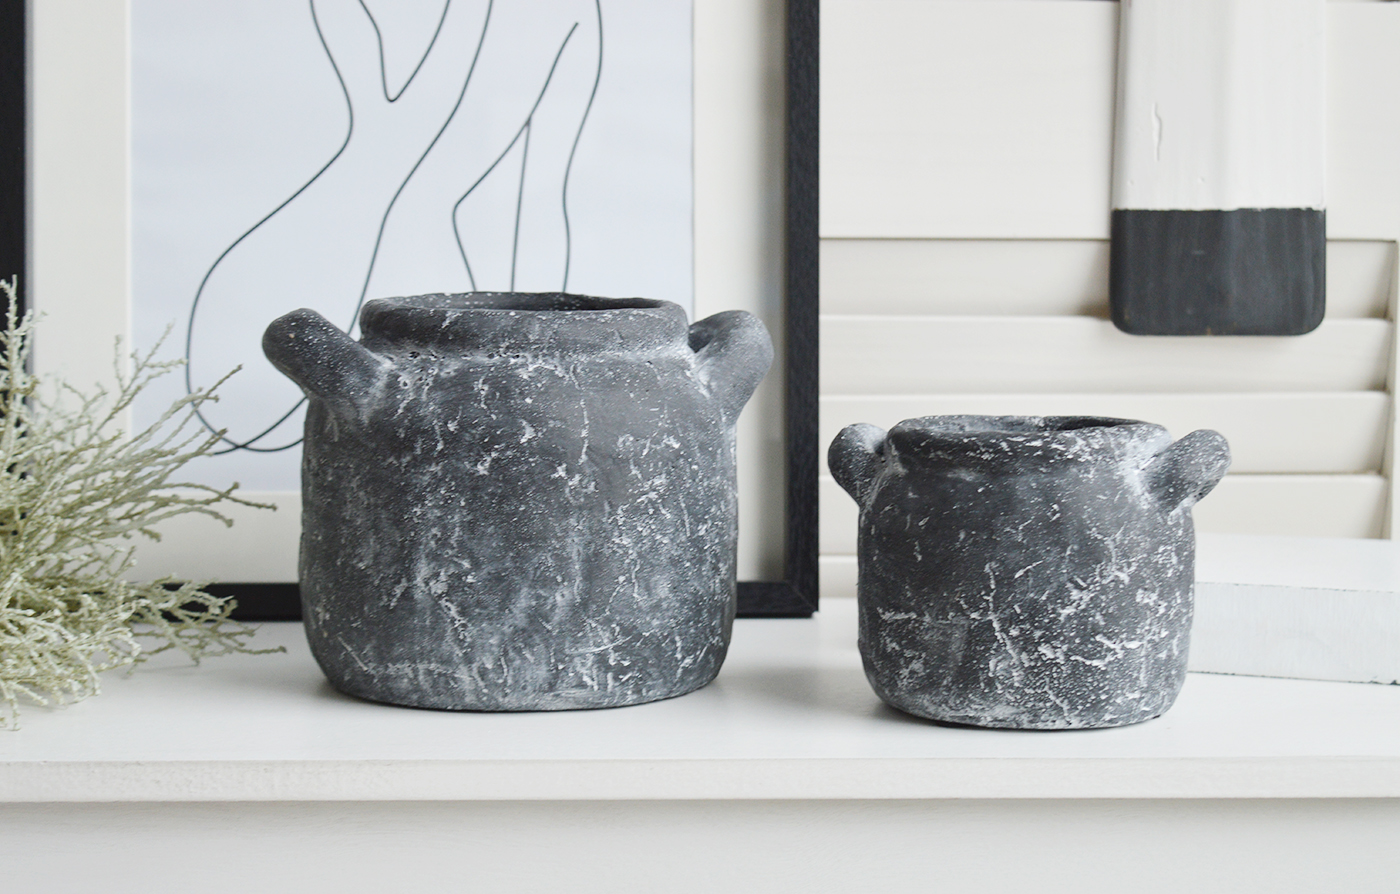 Newfane small stone pots, ideal for styling in New England styled homes for coastal, country and modern farmhouse interiors, complementing and contrasting the furniture